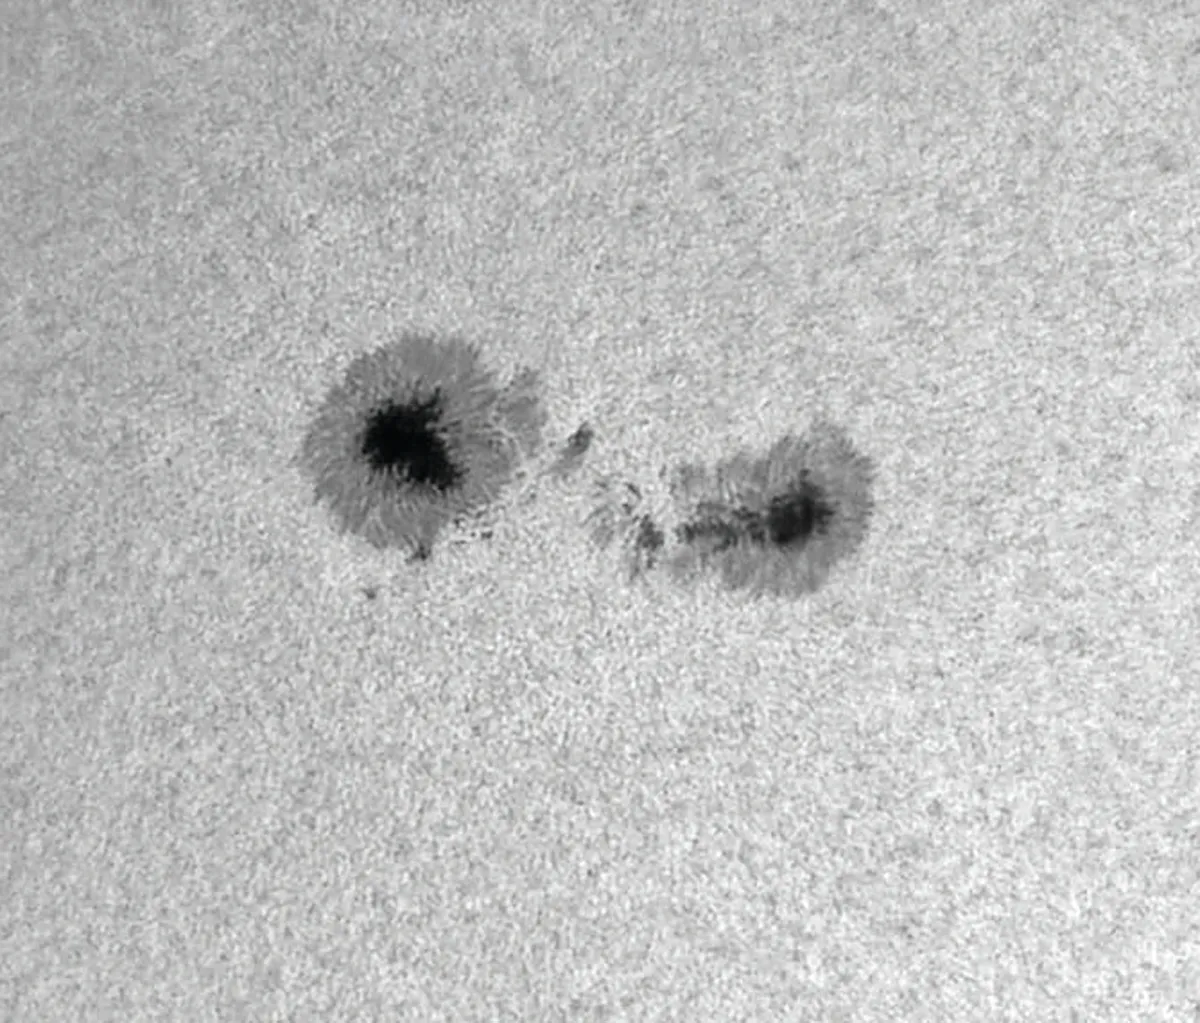 Sunspots as seen using a white-light filter; the dark centre is known as the umbra. Credit: Pete Lawrence